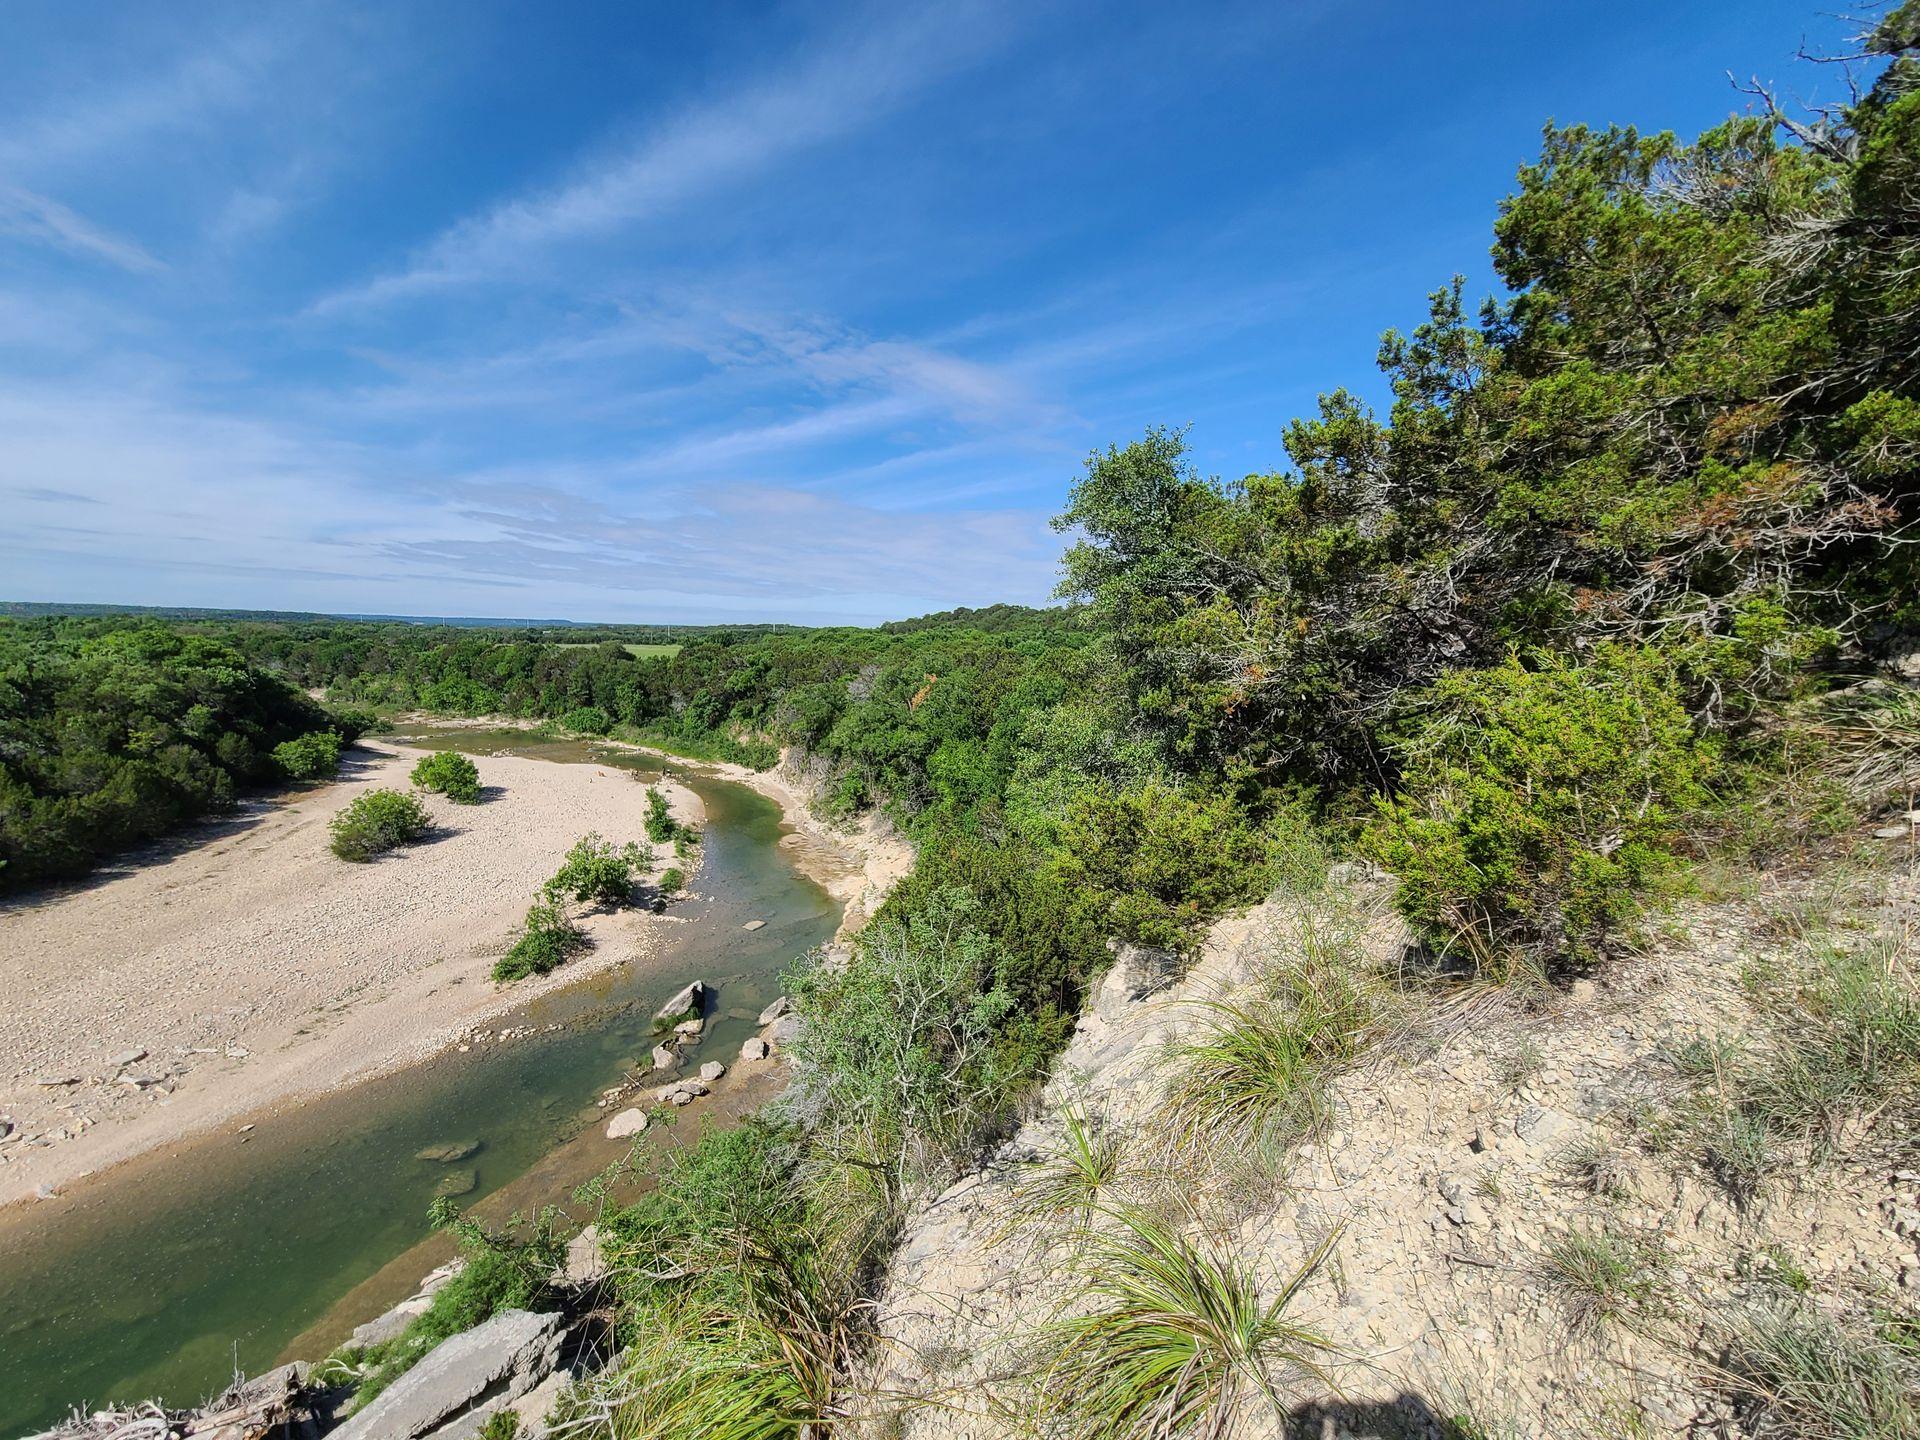 An overlook of the Paluxy River in Dinosaur Valley State Park